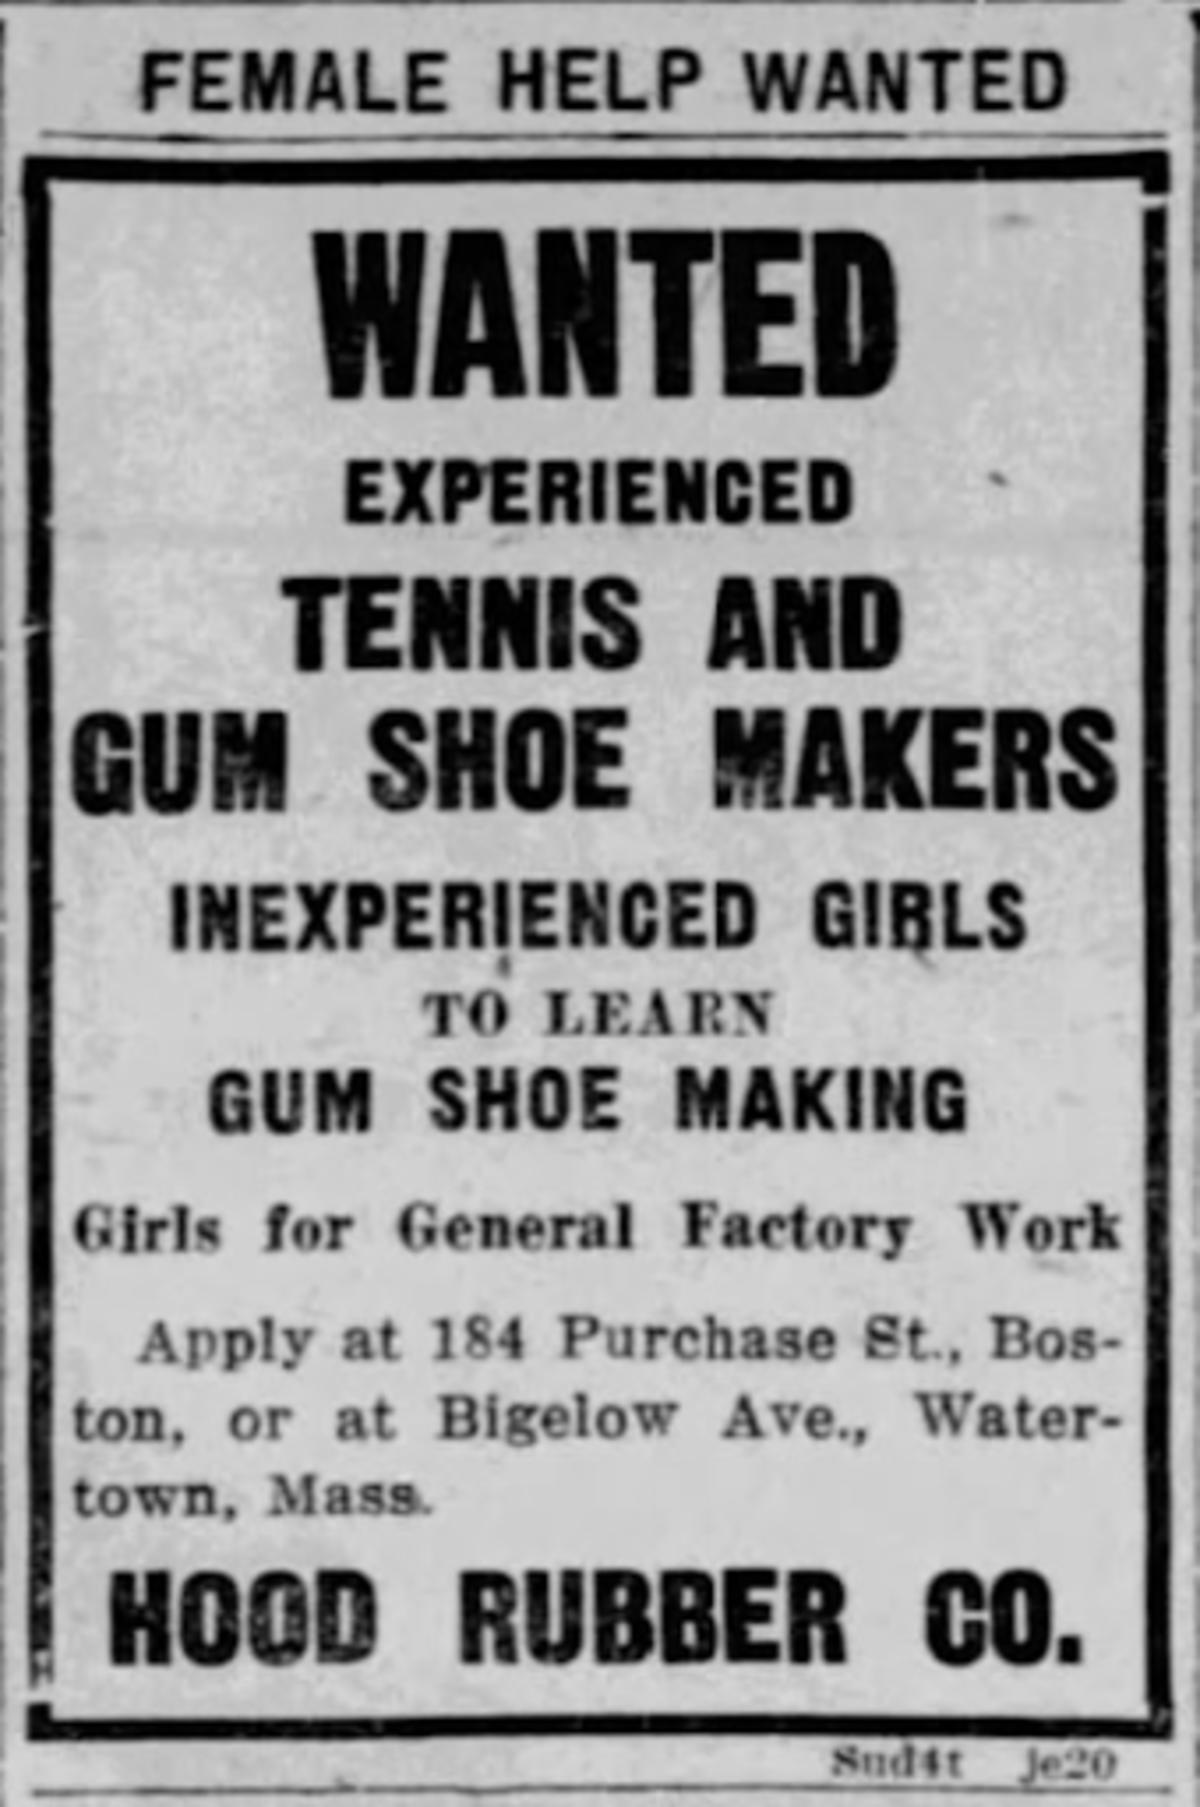 Help wanted advertisement for Hood Rubber Company, 1920, Boston Globe